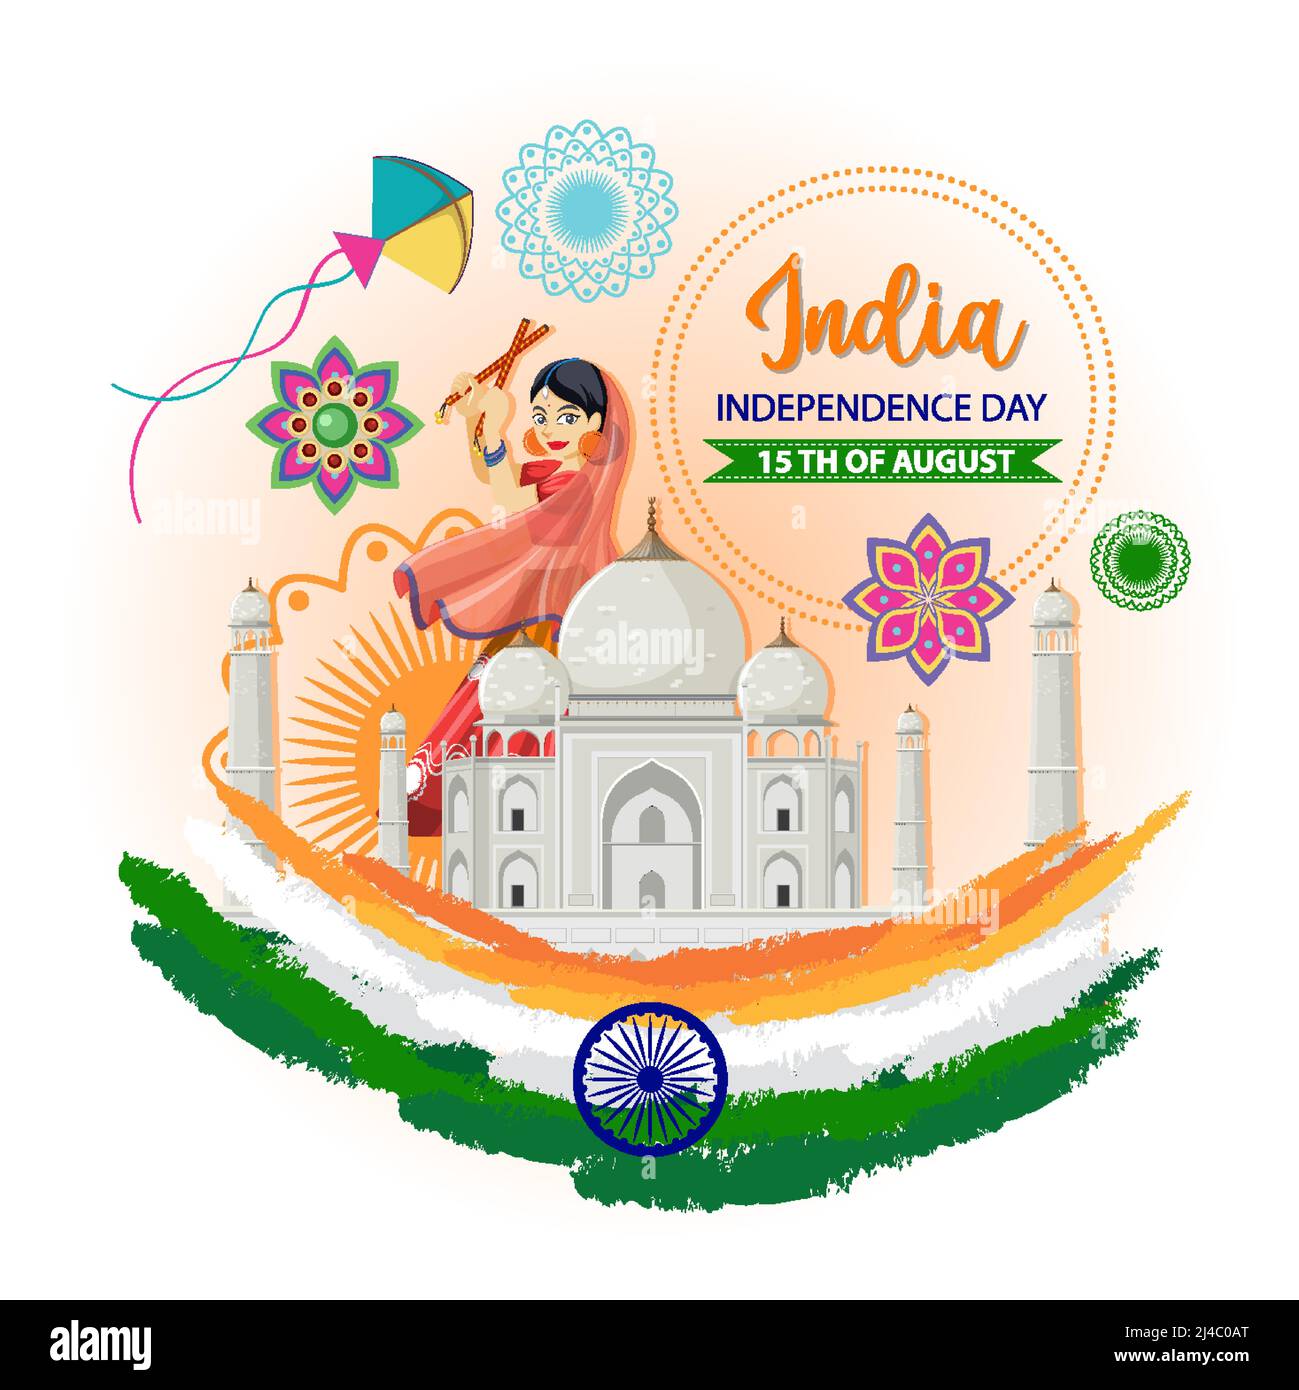 India Independence Day Poster illustration Stock Vector Image ...